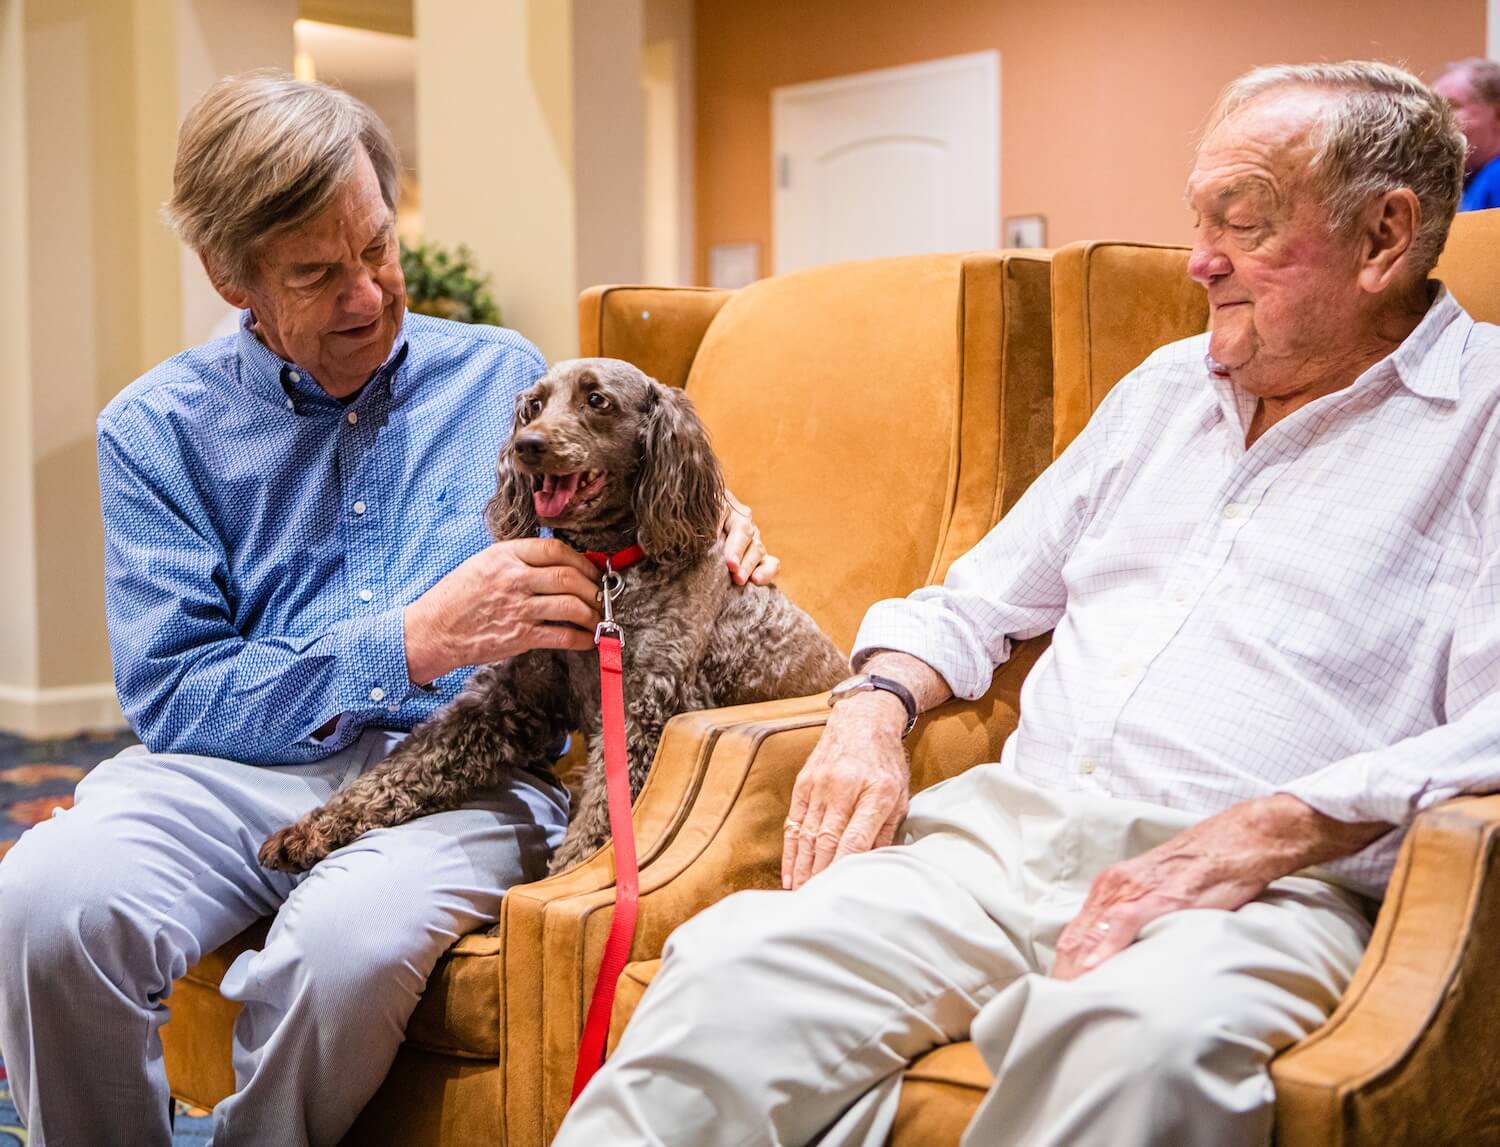 Senior friends petting a dog together